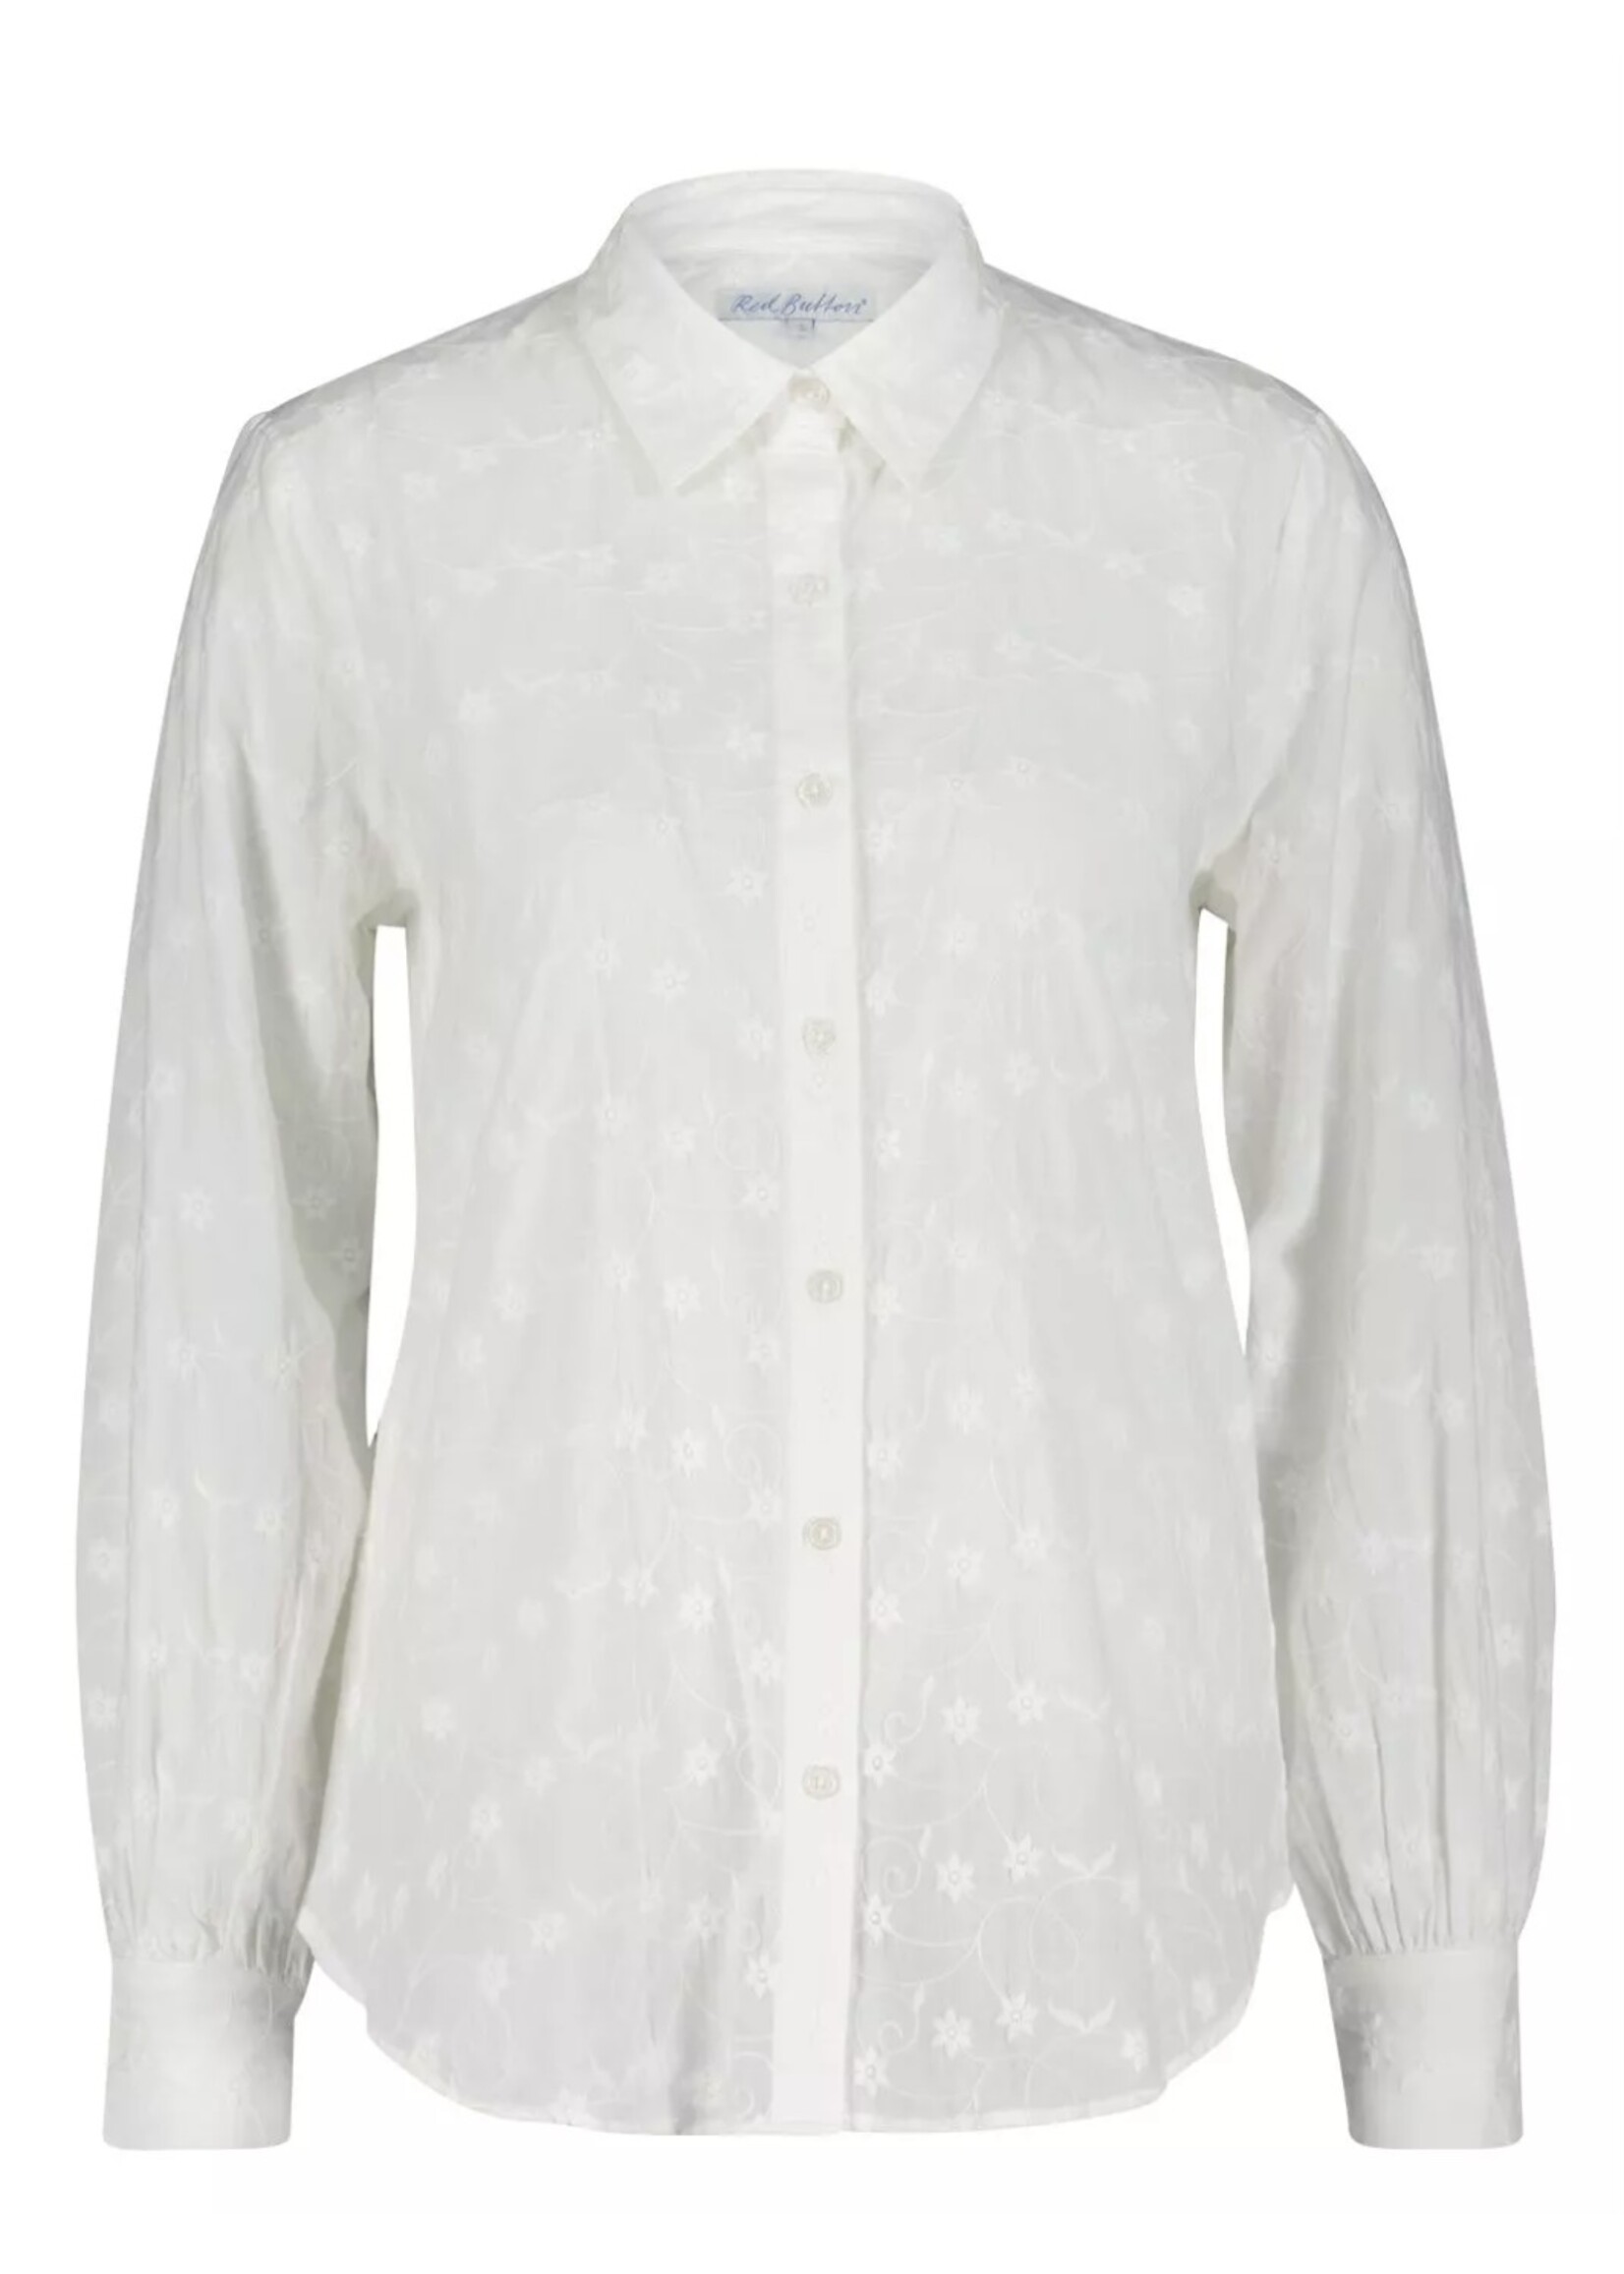 Red Button Red Button - Bobie embroidery - Blouse - Off white